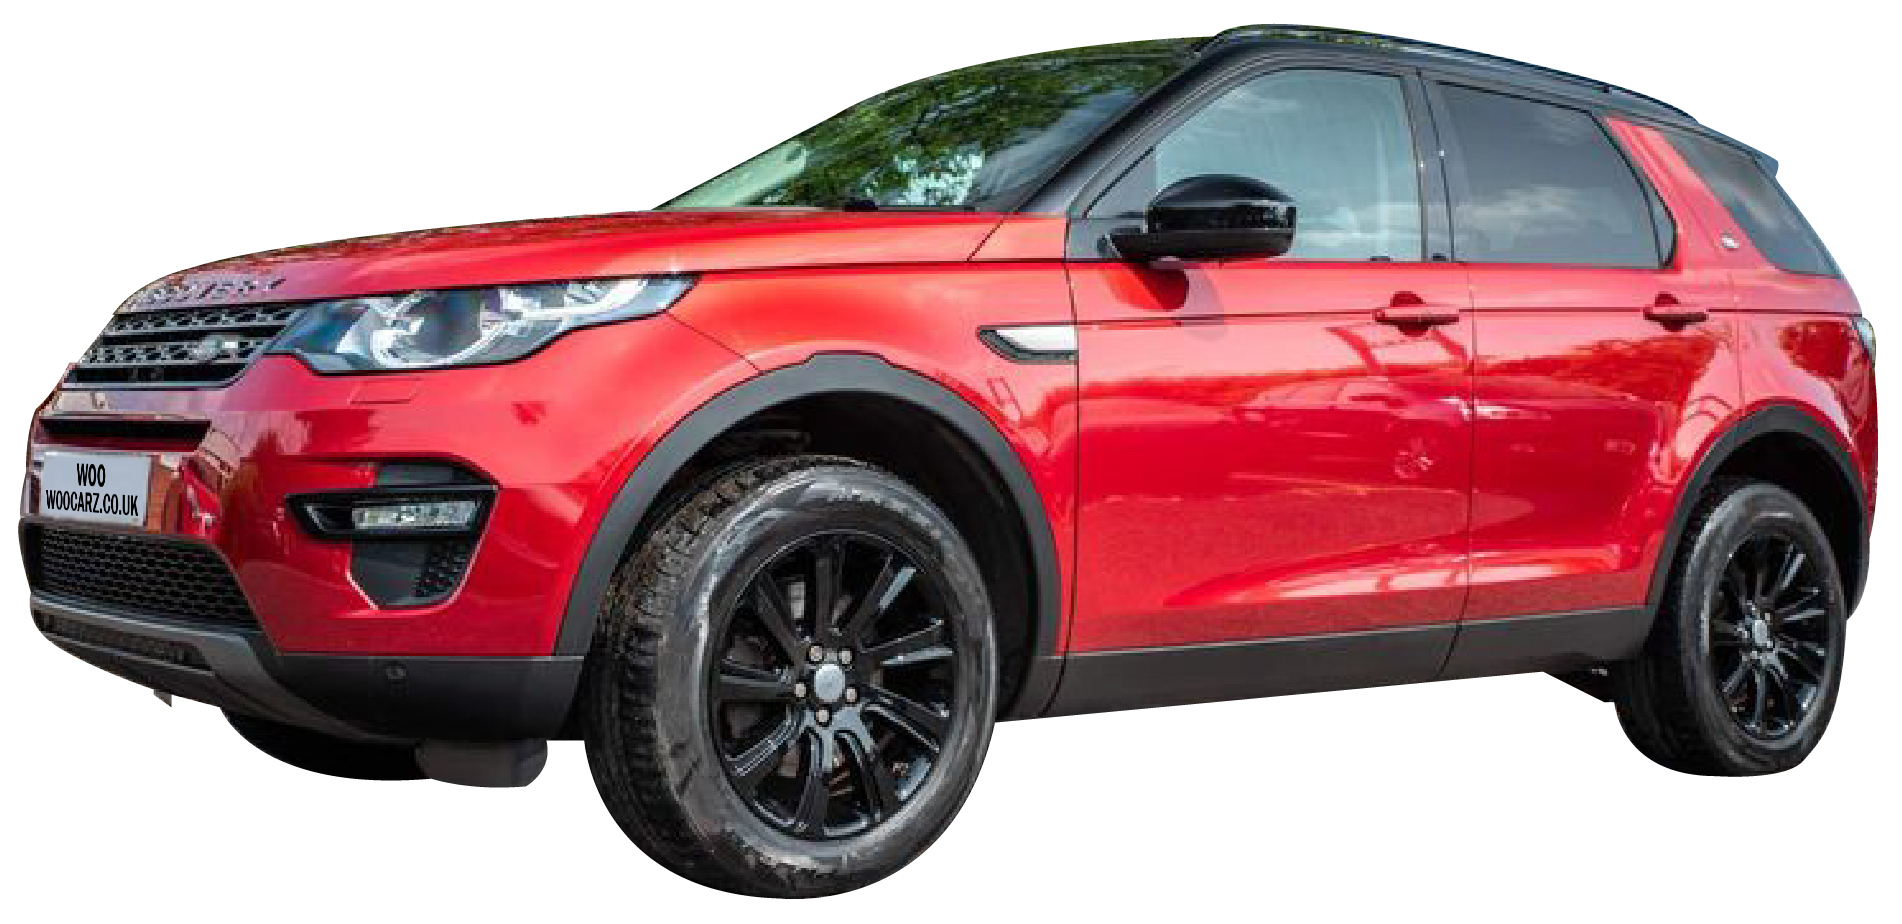 RED LAND ROVER DISCOVERY CAR